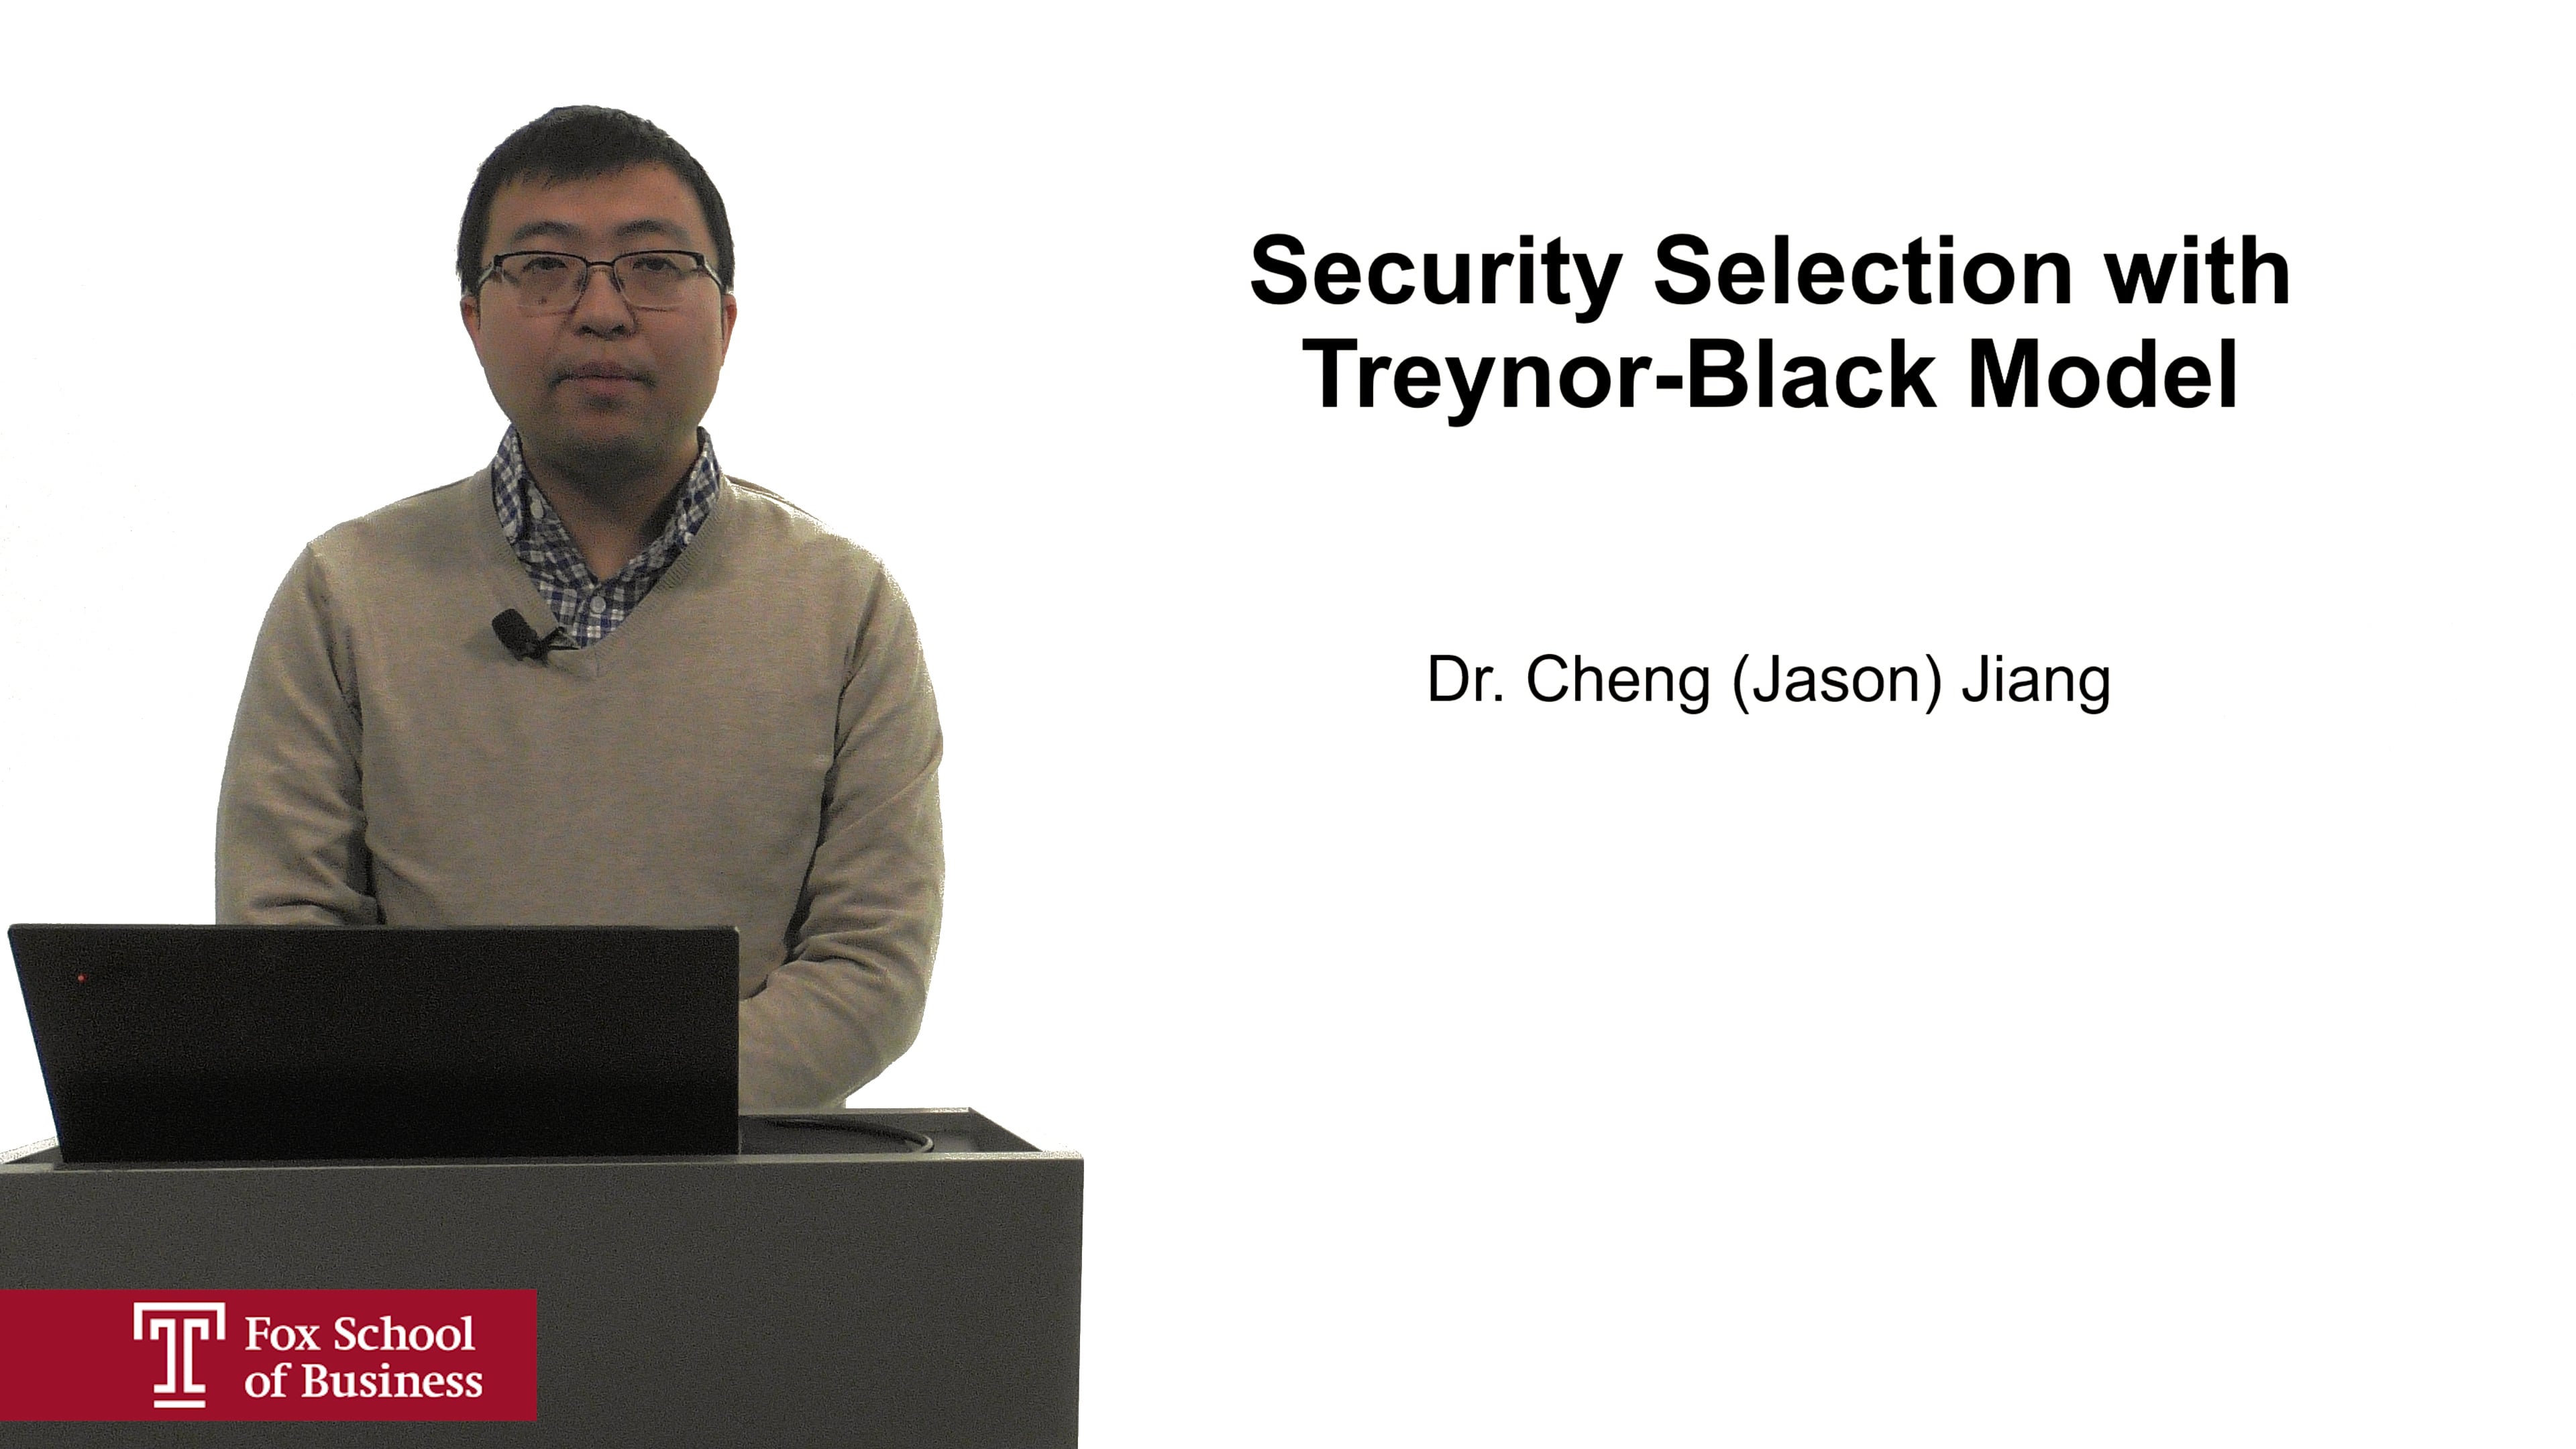 Security Selection with Treynor-Black Model